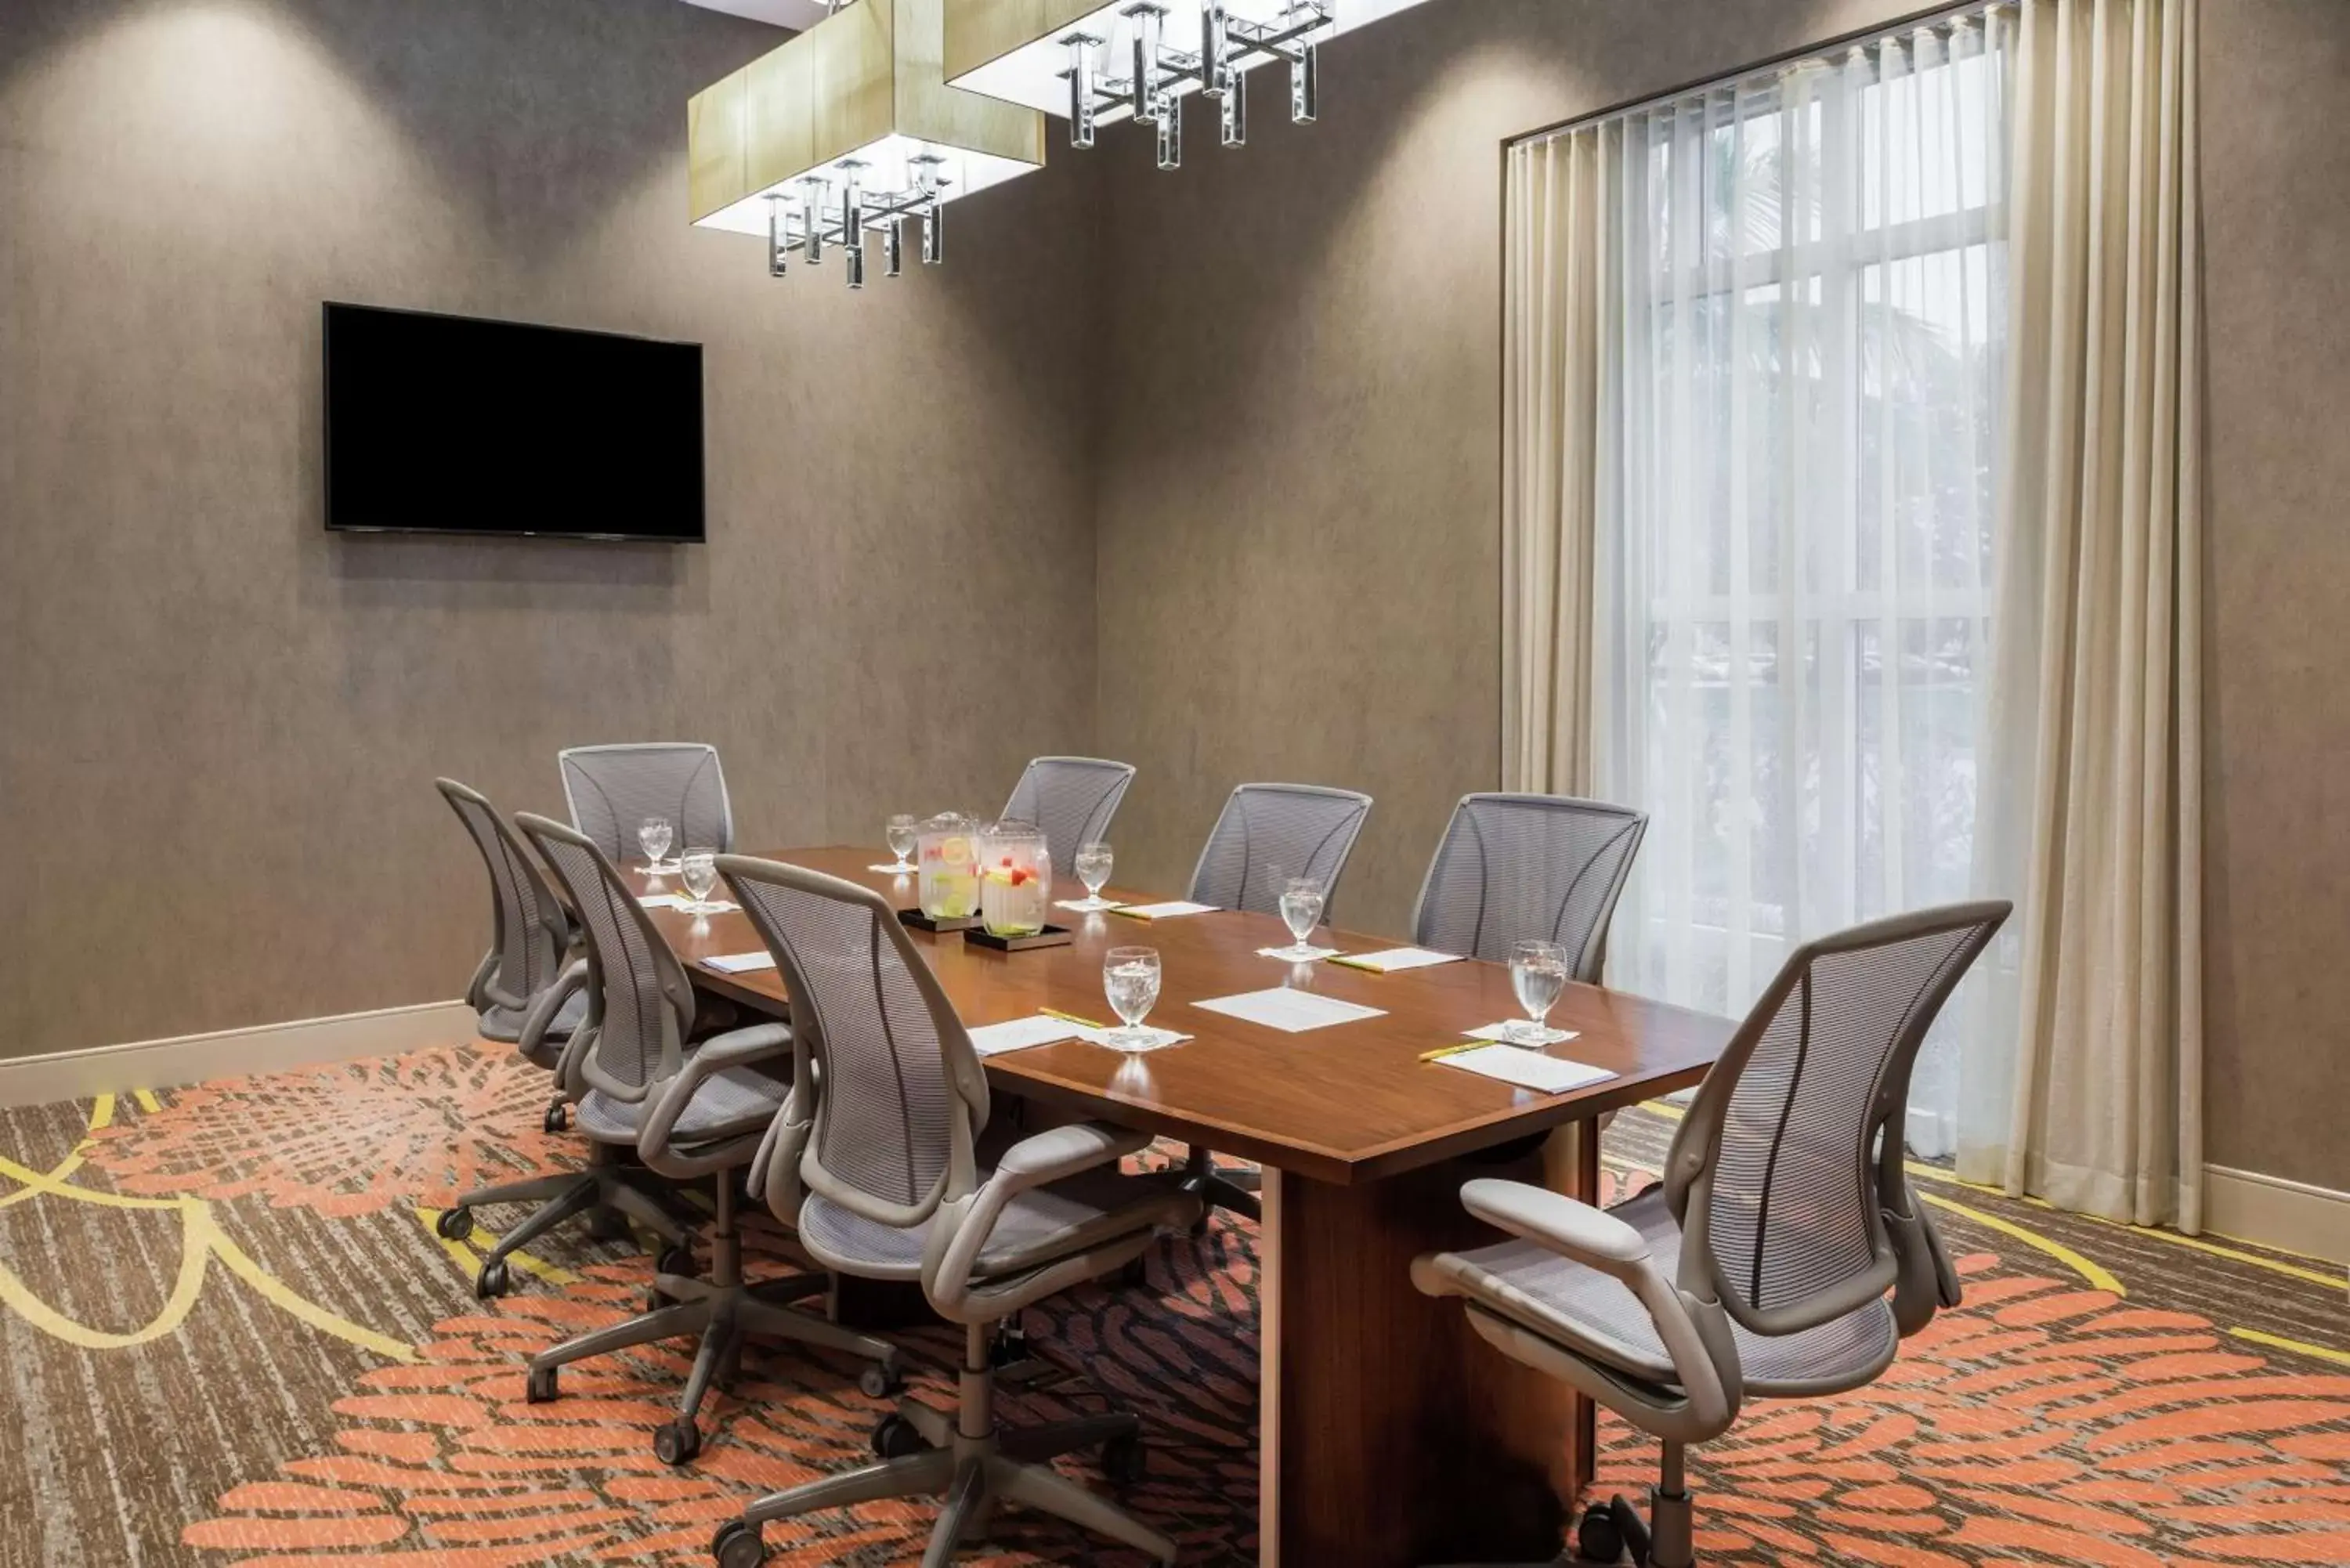 Meeting/conference room in Hilton Garden Inn Miami Dolphin Mall